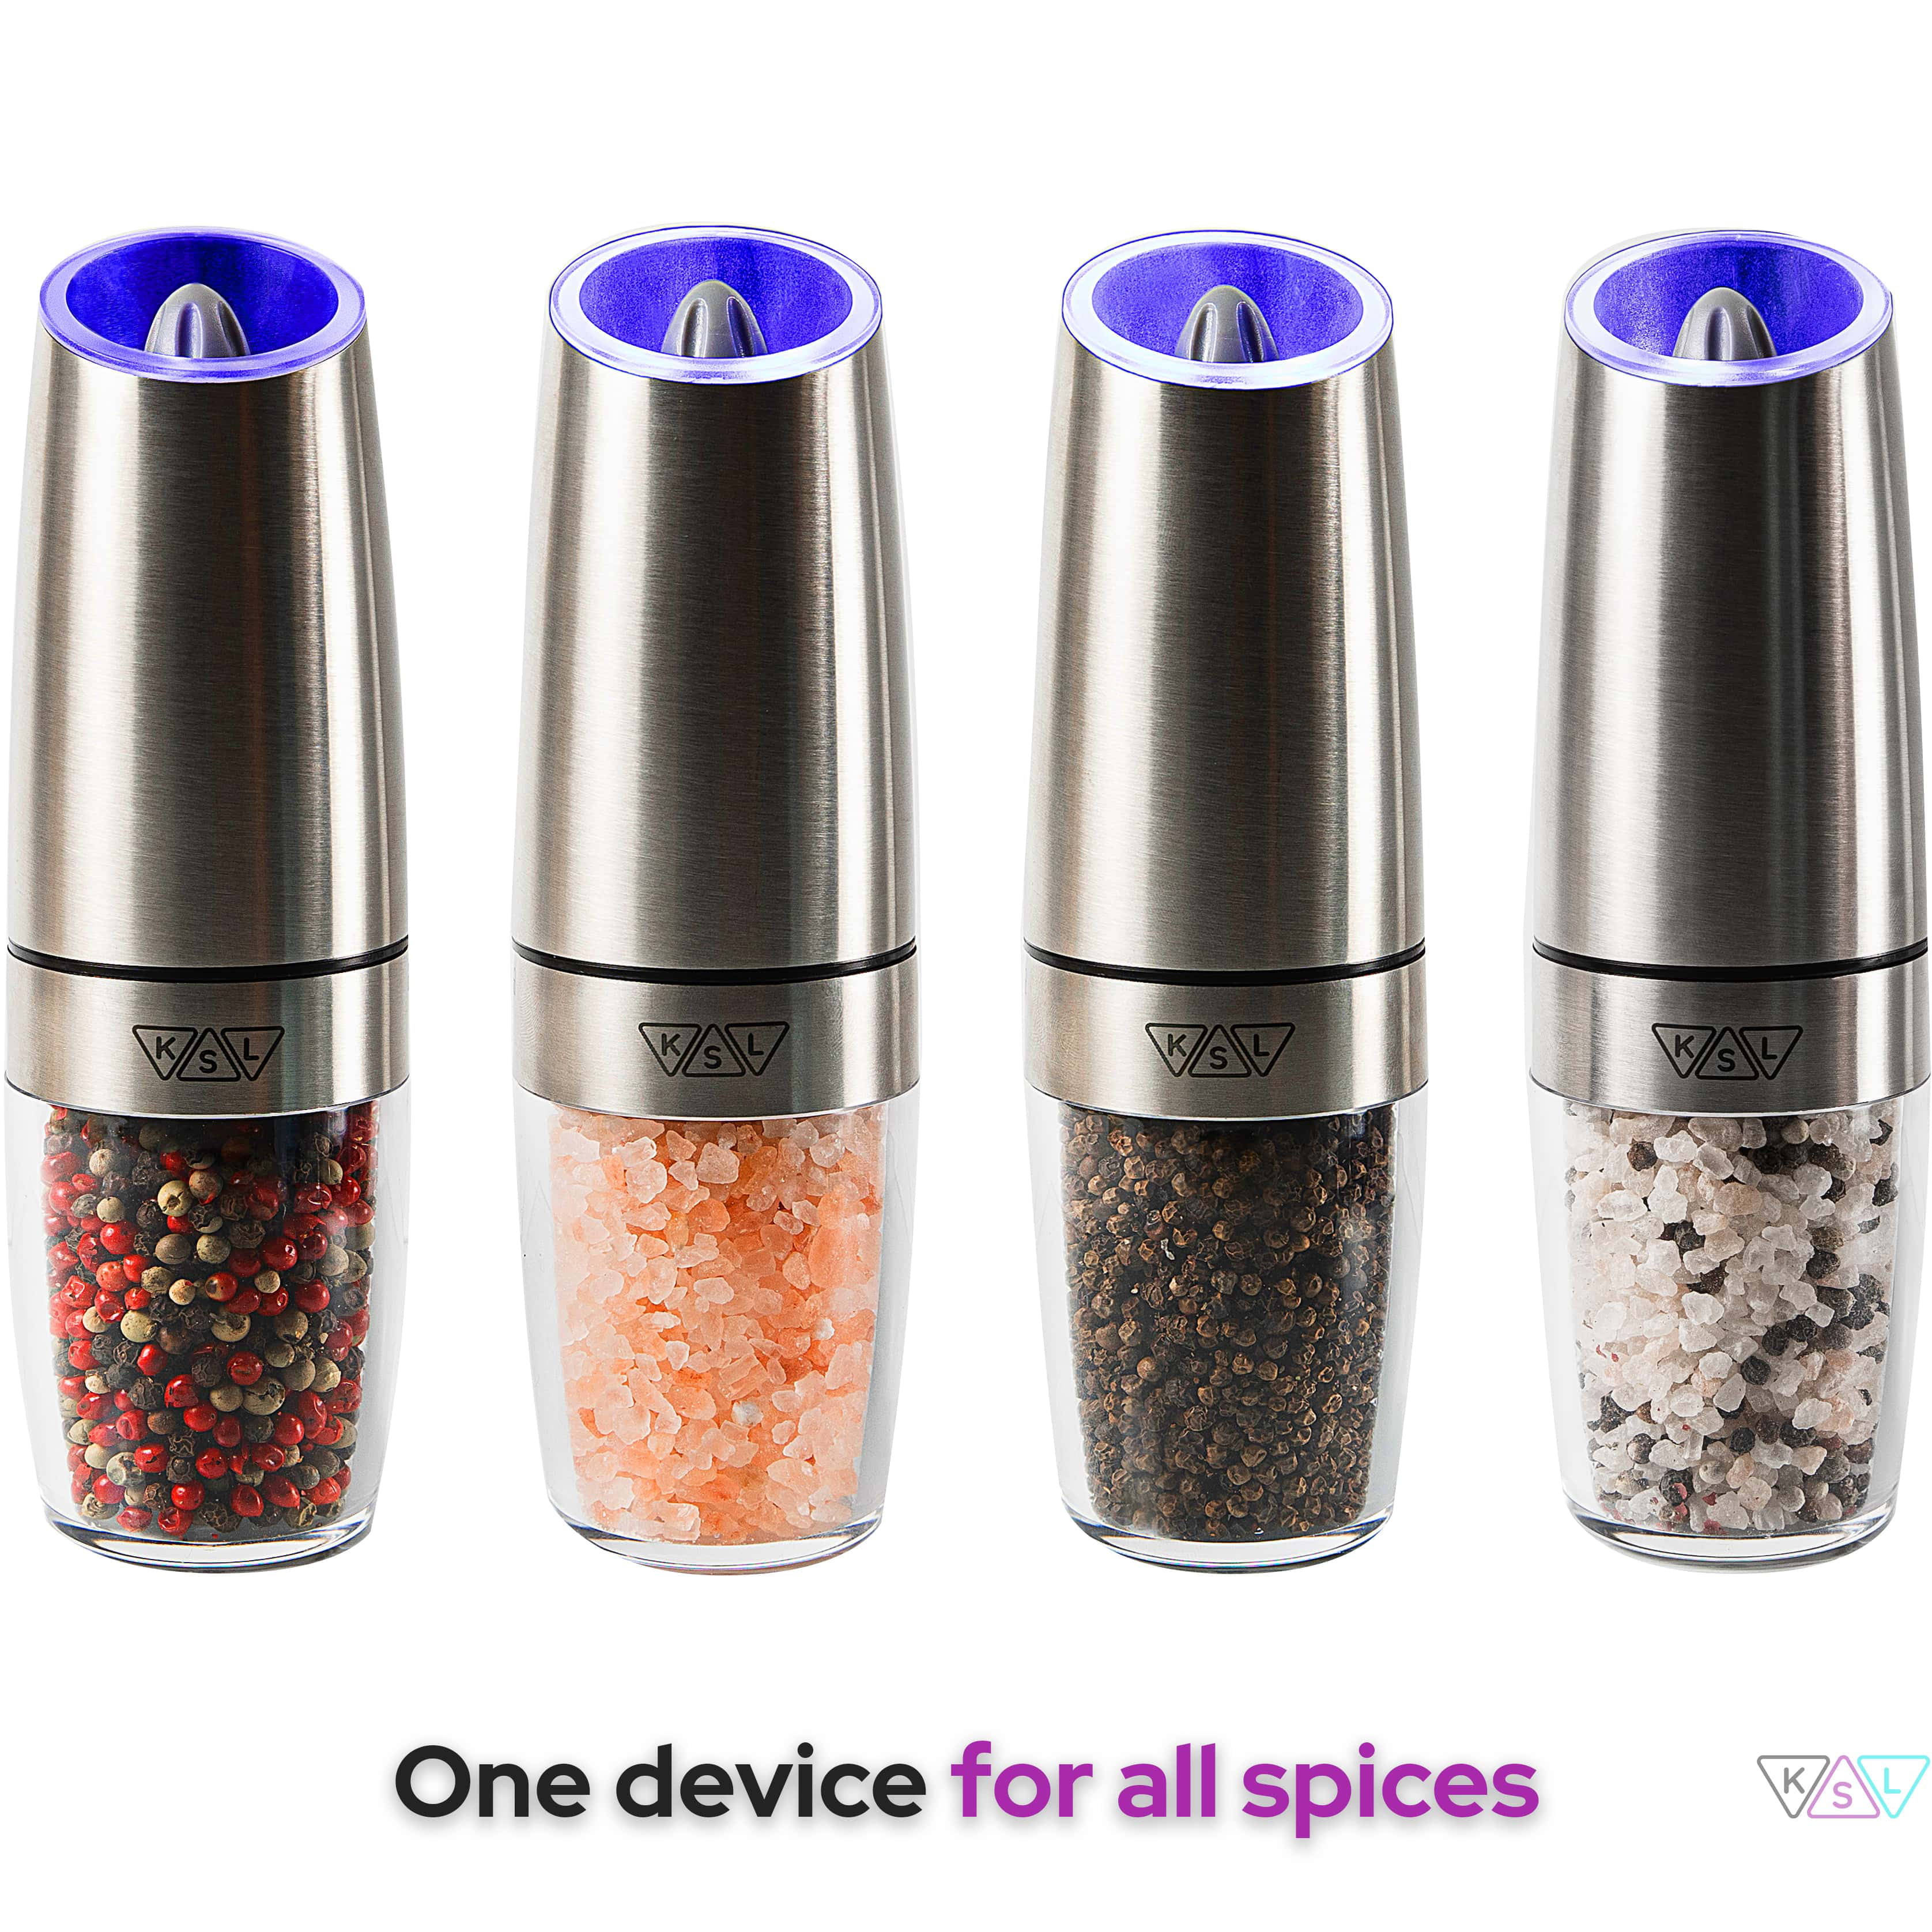 L'Chaim Meats Electric Salt or Pepper Grinder Stainless Steel